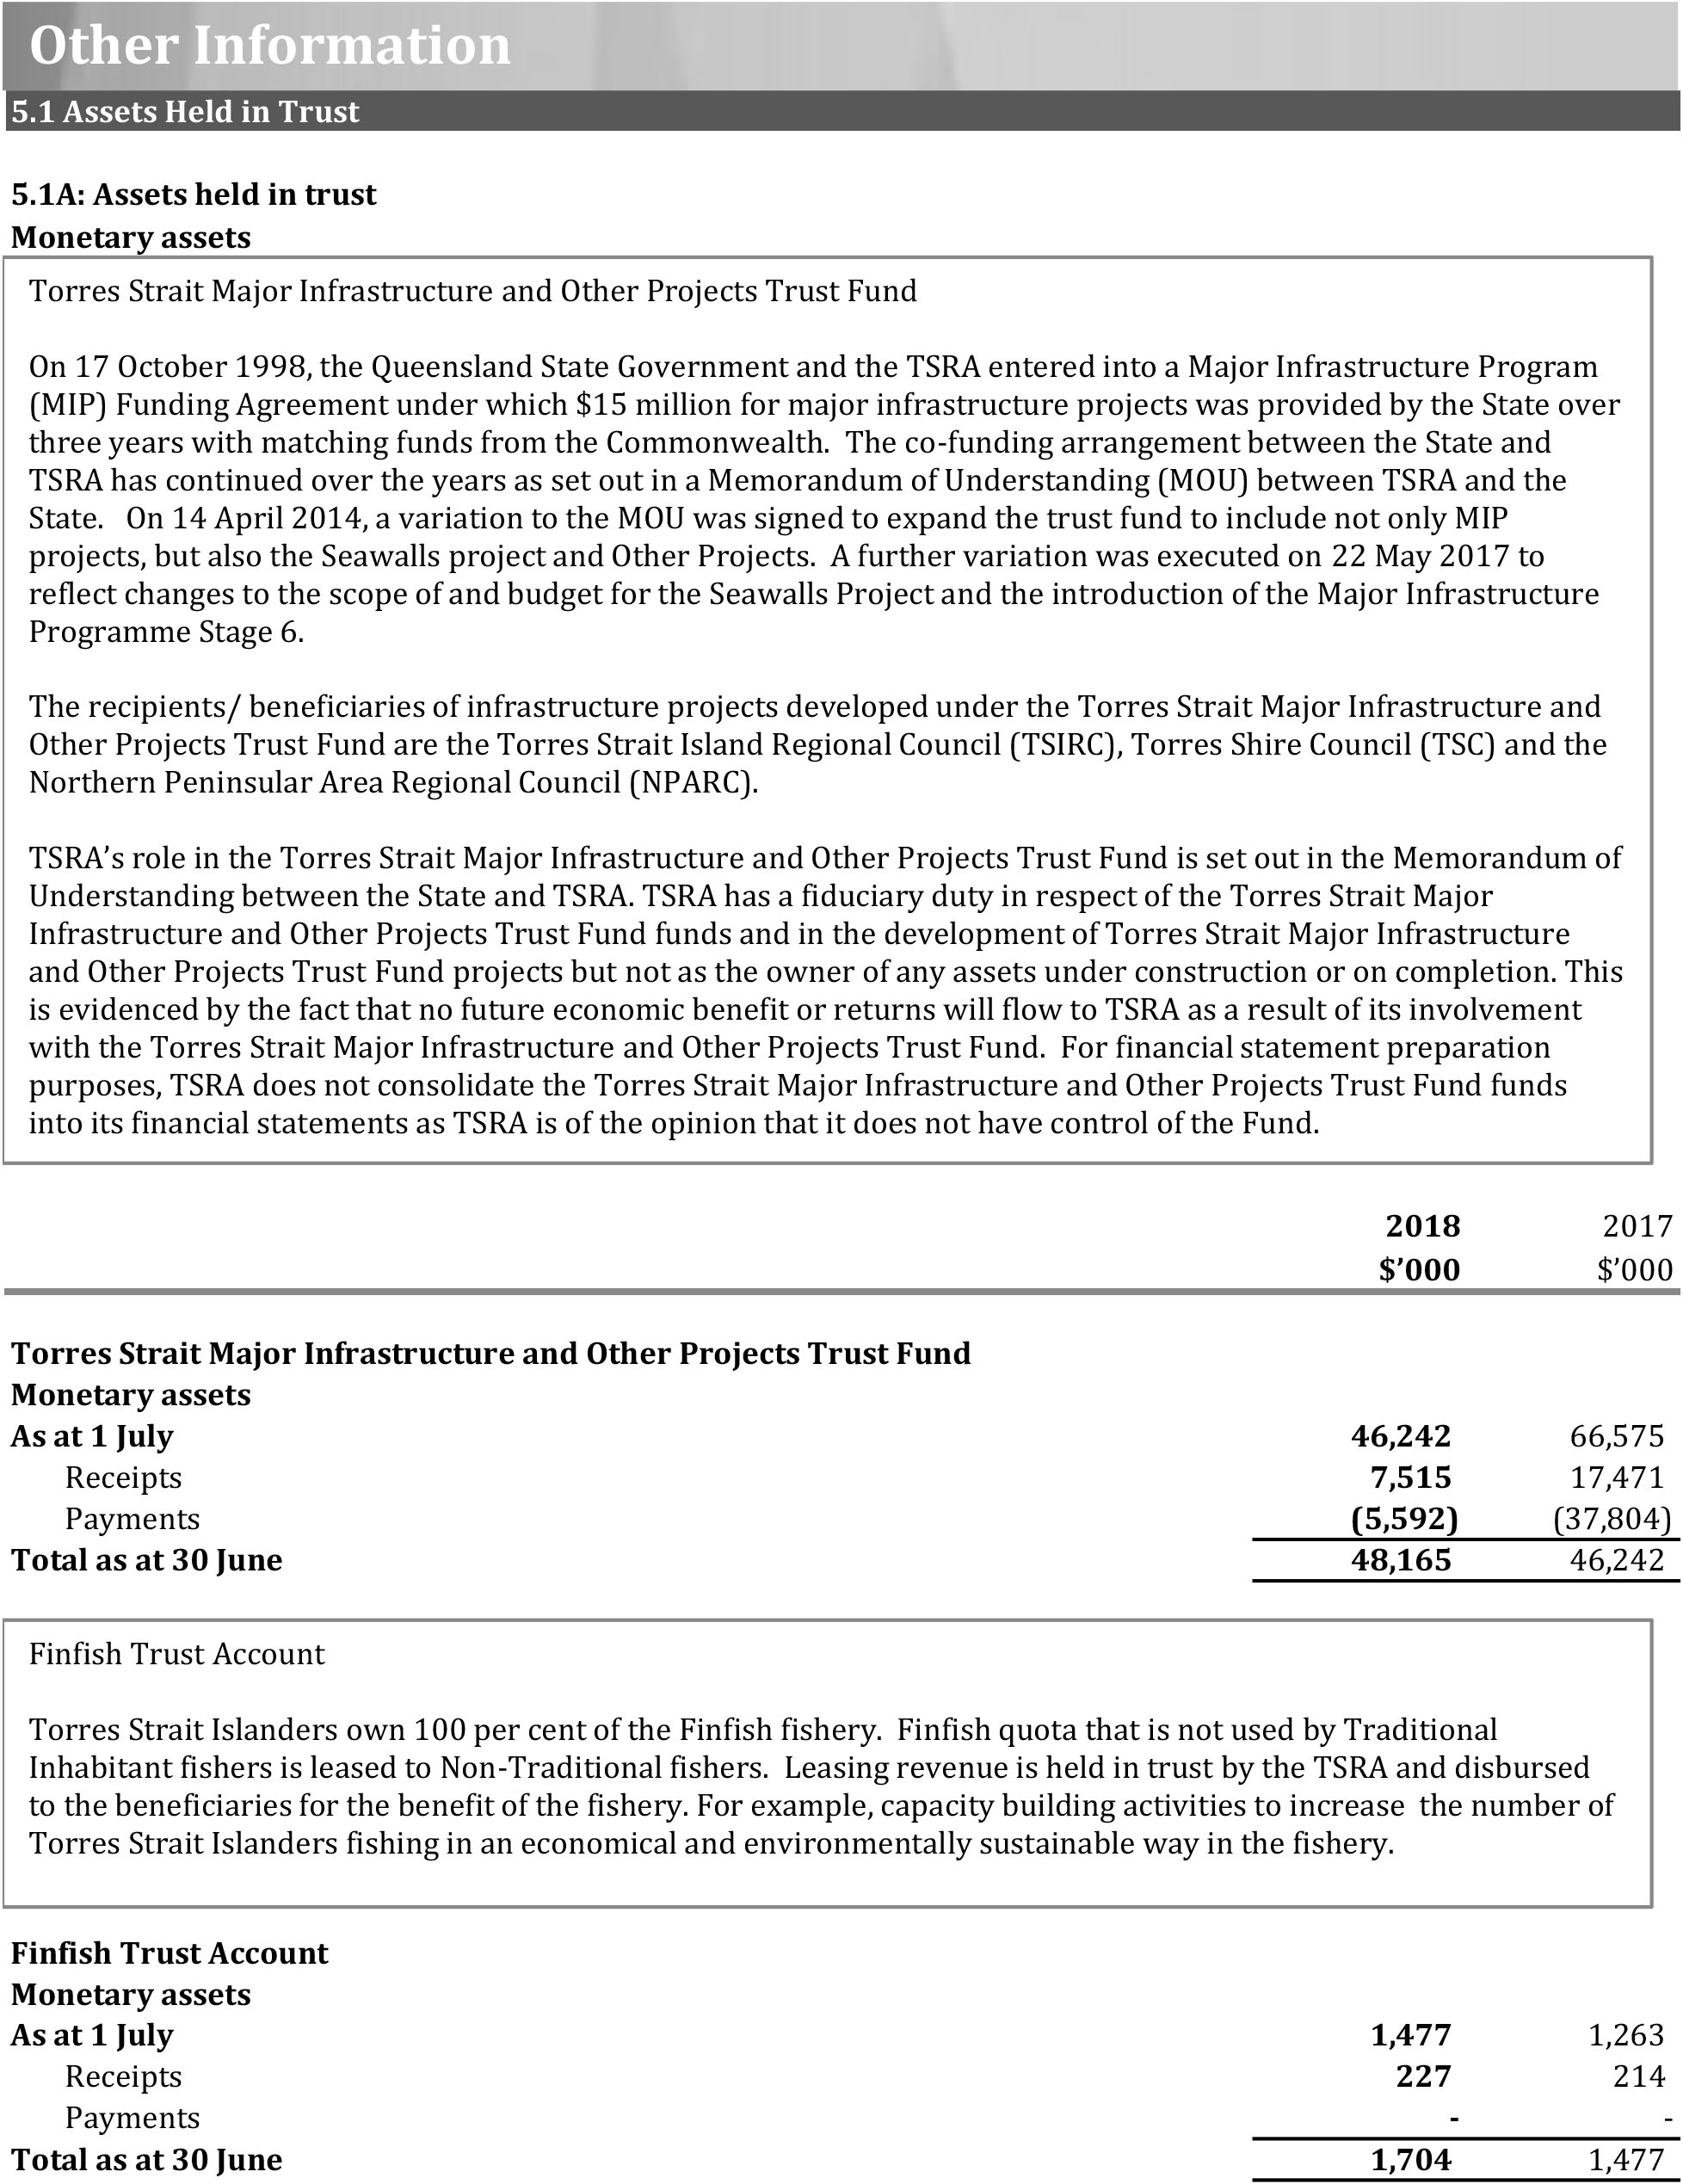 A photograph of Other Information on Financial Statements, page 1